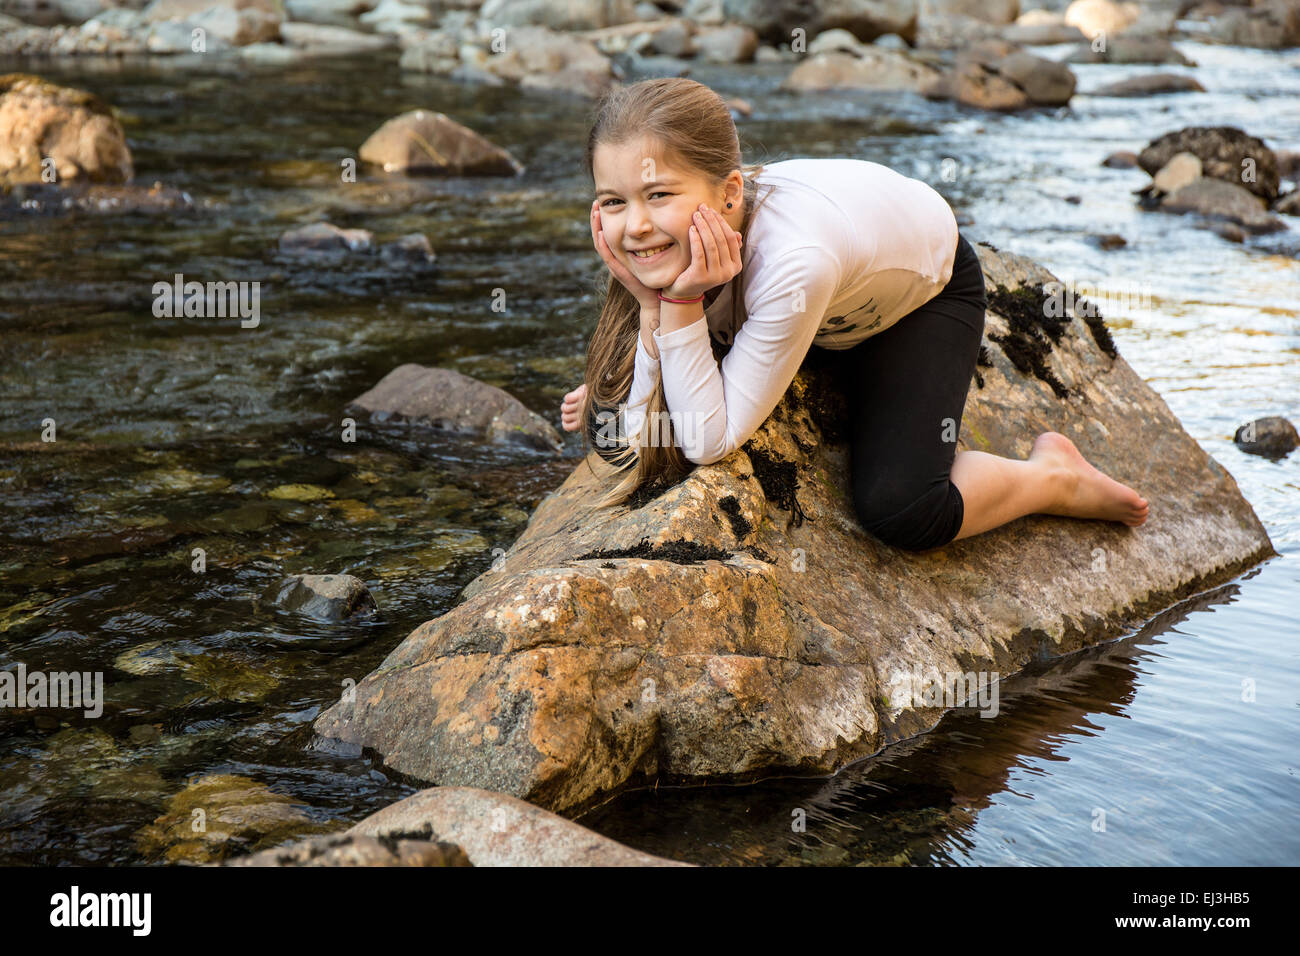 Nine year old girl playfully 'riding a rock' in the Snoqualmie River, in Olallie State Park, near North Bend, Washington, USA Stock Photo